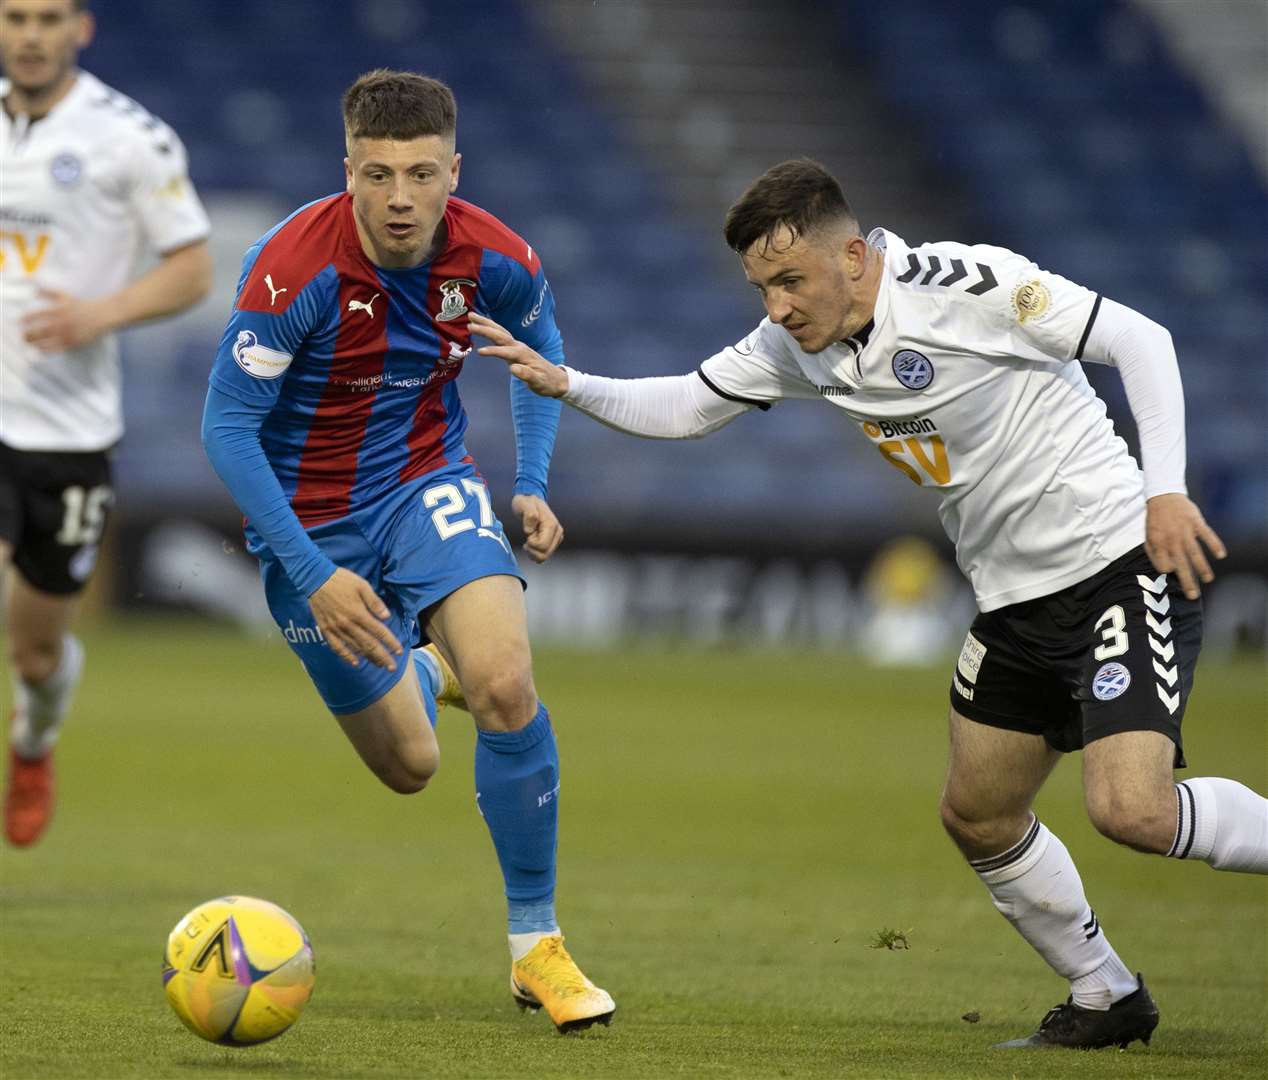 Daniel MacKay is attracting interest from Premiership clubs. Picture: Ken Macpherson